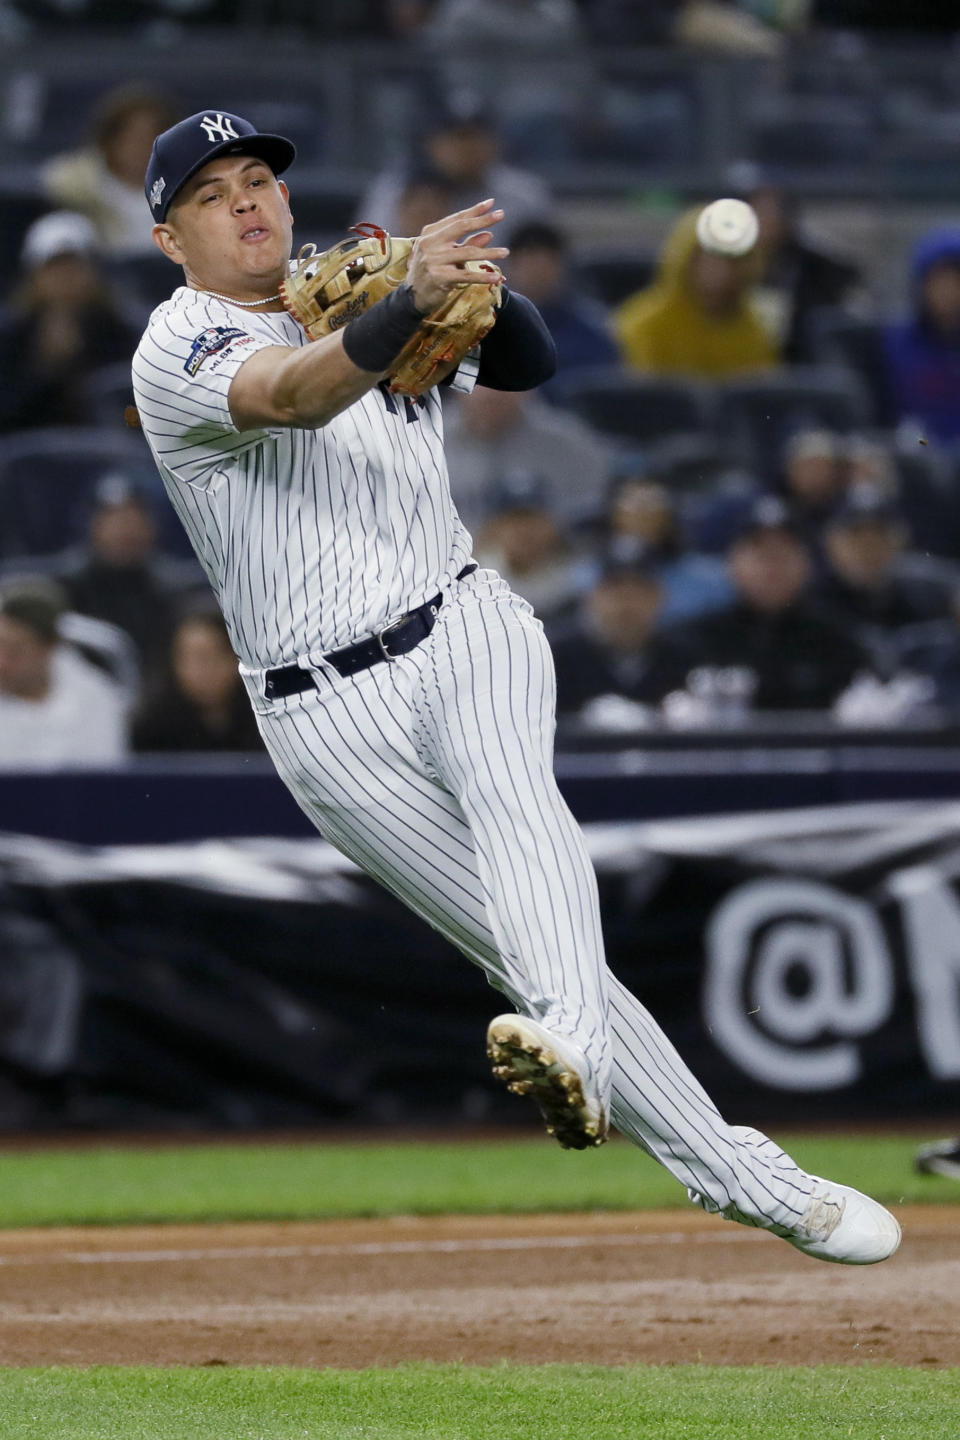 FILE - In this Oct. 18, 2019, file photo, New York Yankees third baseman Gio Urshela throws out Houston Astros' Yuli Gurriel at first during the eighth inning in Game 5 of baseball's American League Championship Series in New York. New York's position players include catcher Gary Sánchez, first baseman Luke Voit, second baseman DJ LeMahieu, shortstop Gleyber Torres and third baseman Urshela. (AP Photo/Matt Slocum, File)